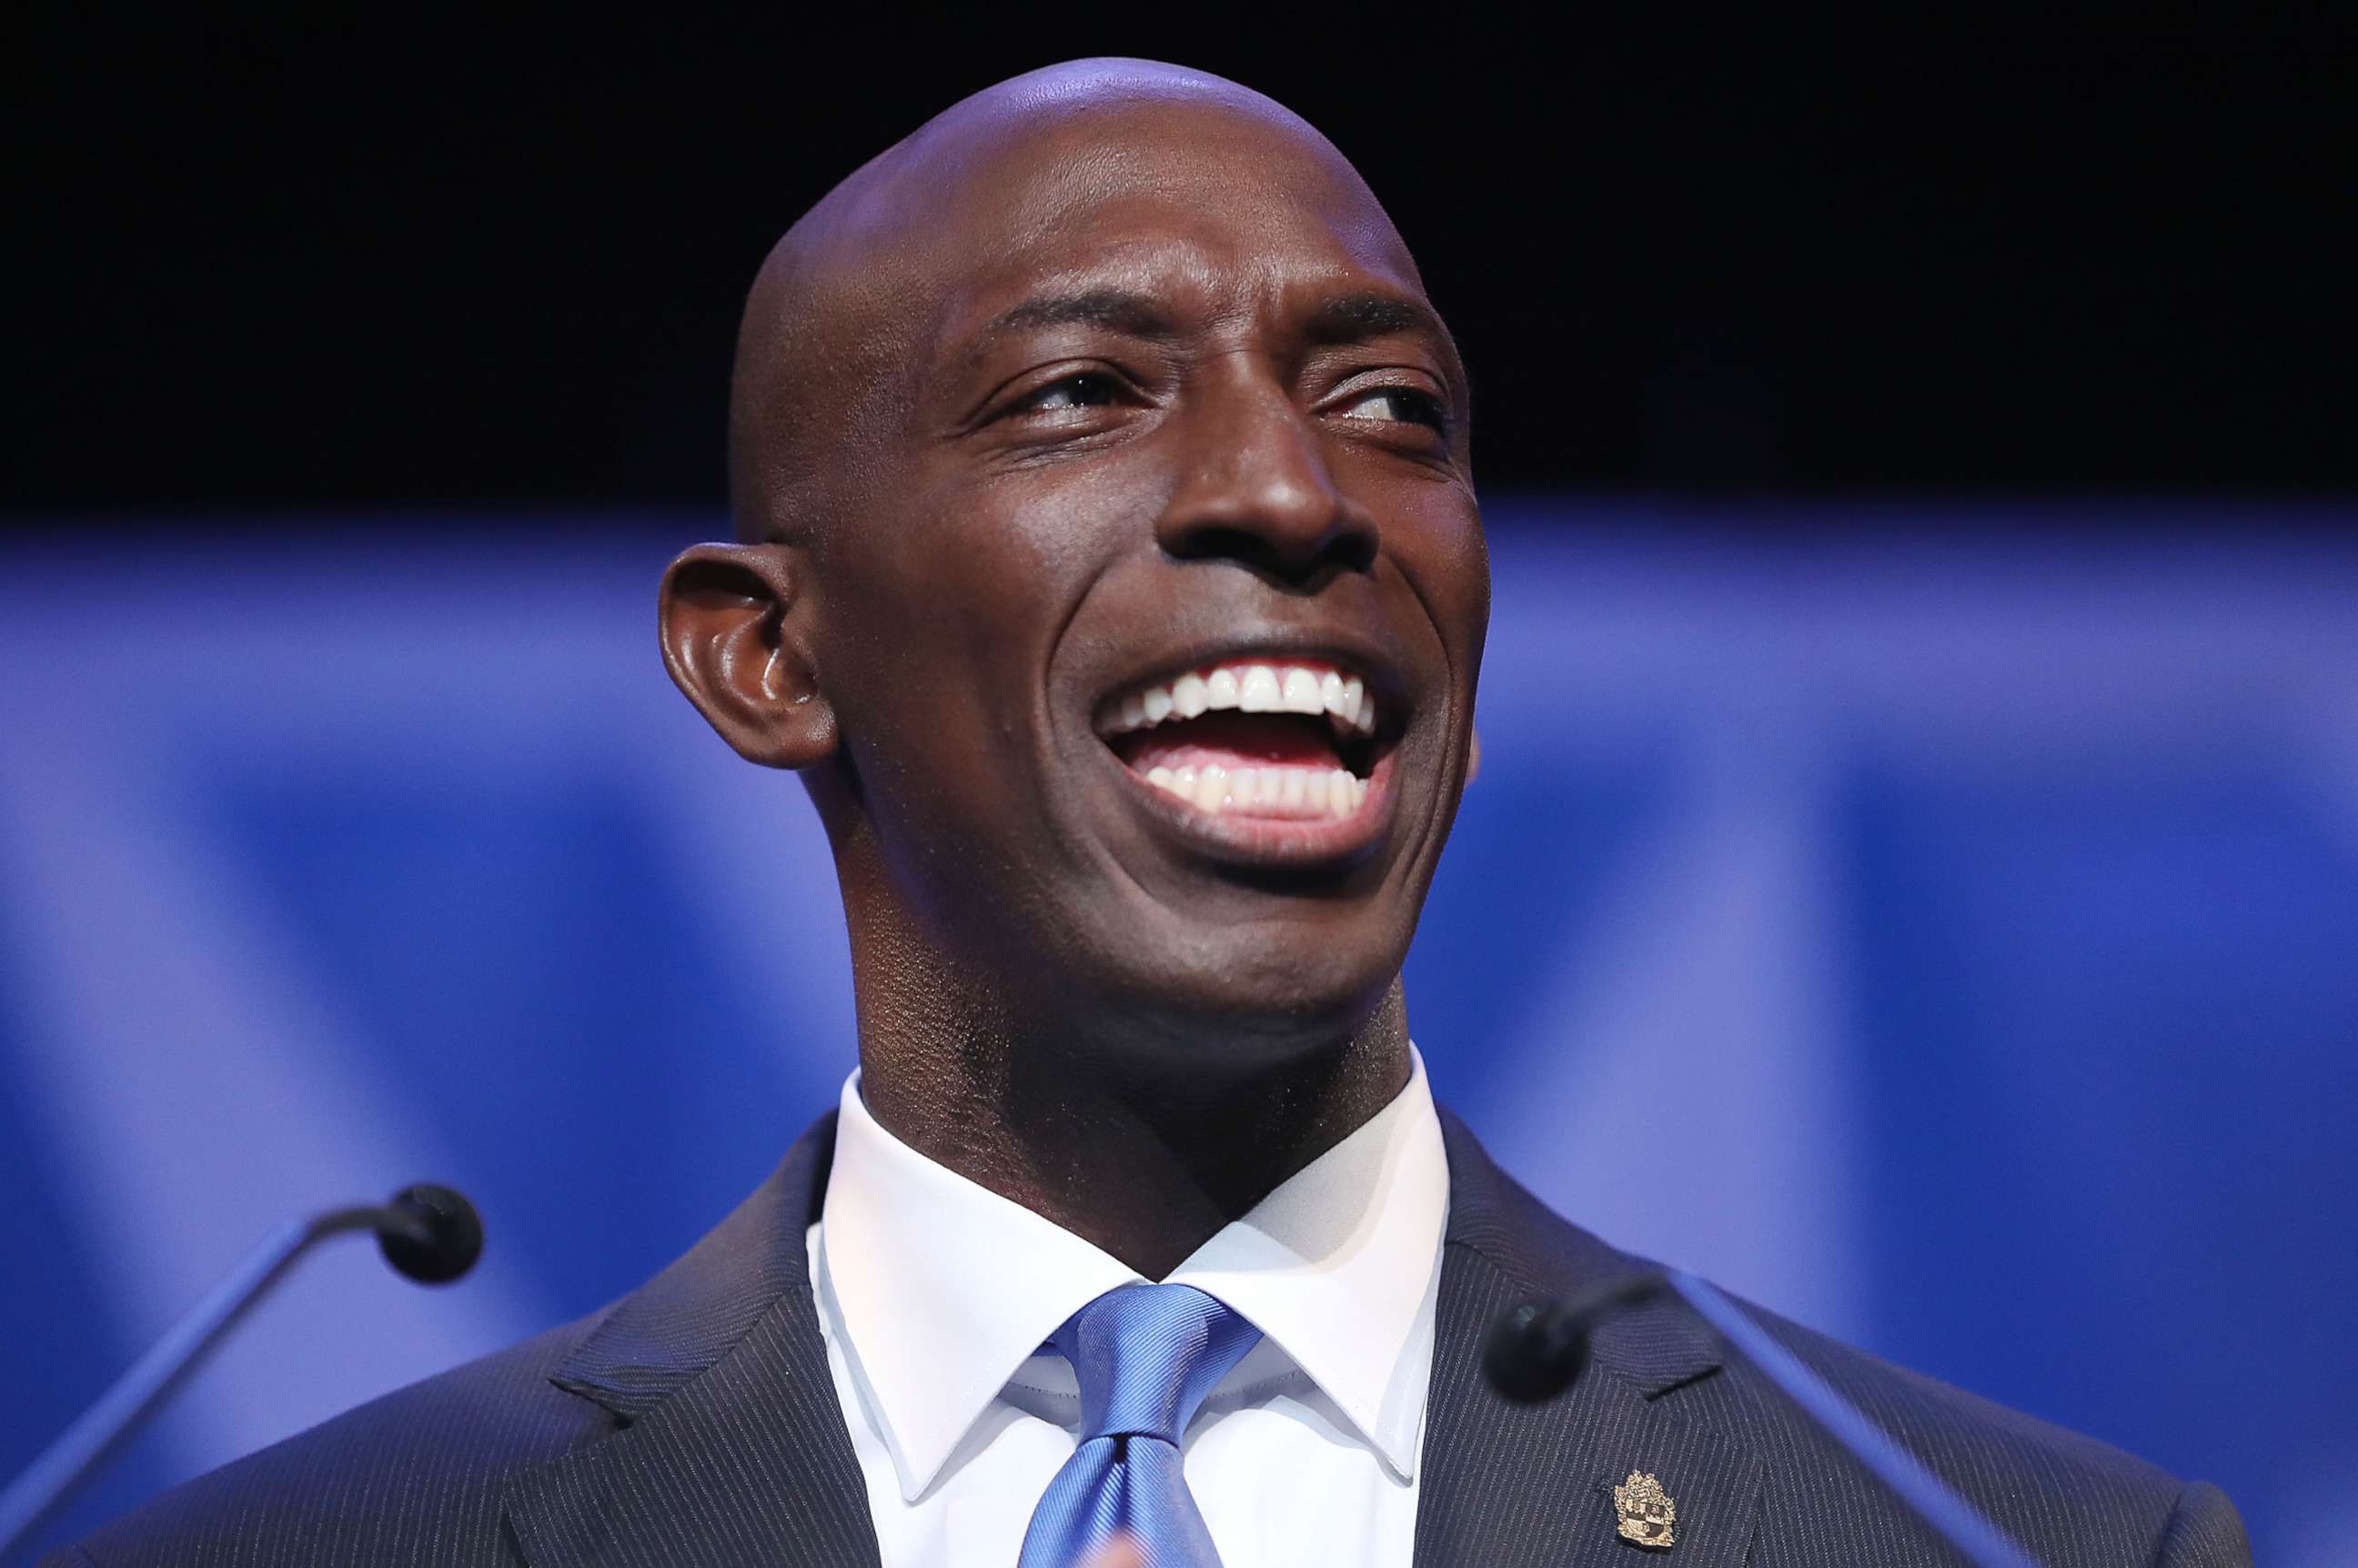 PHOTO: Wayne Messam speaks at a rally at Florida Memorial University in Miami Gardens, Florida, March 30, 2019.